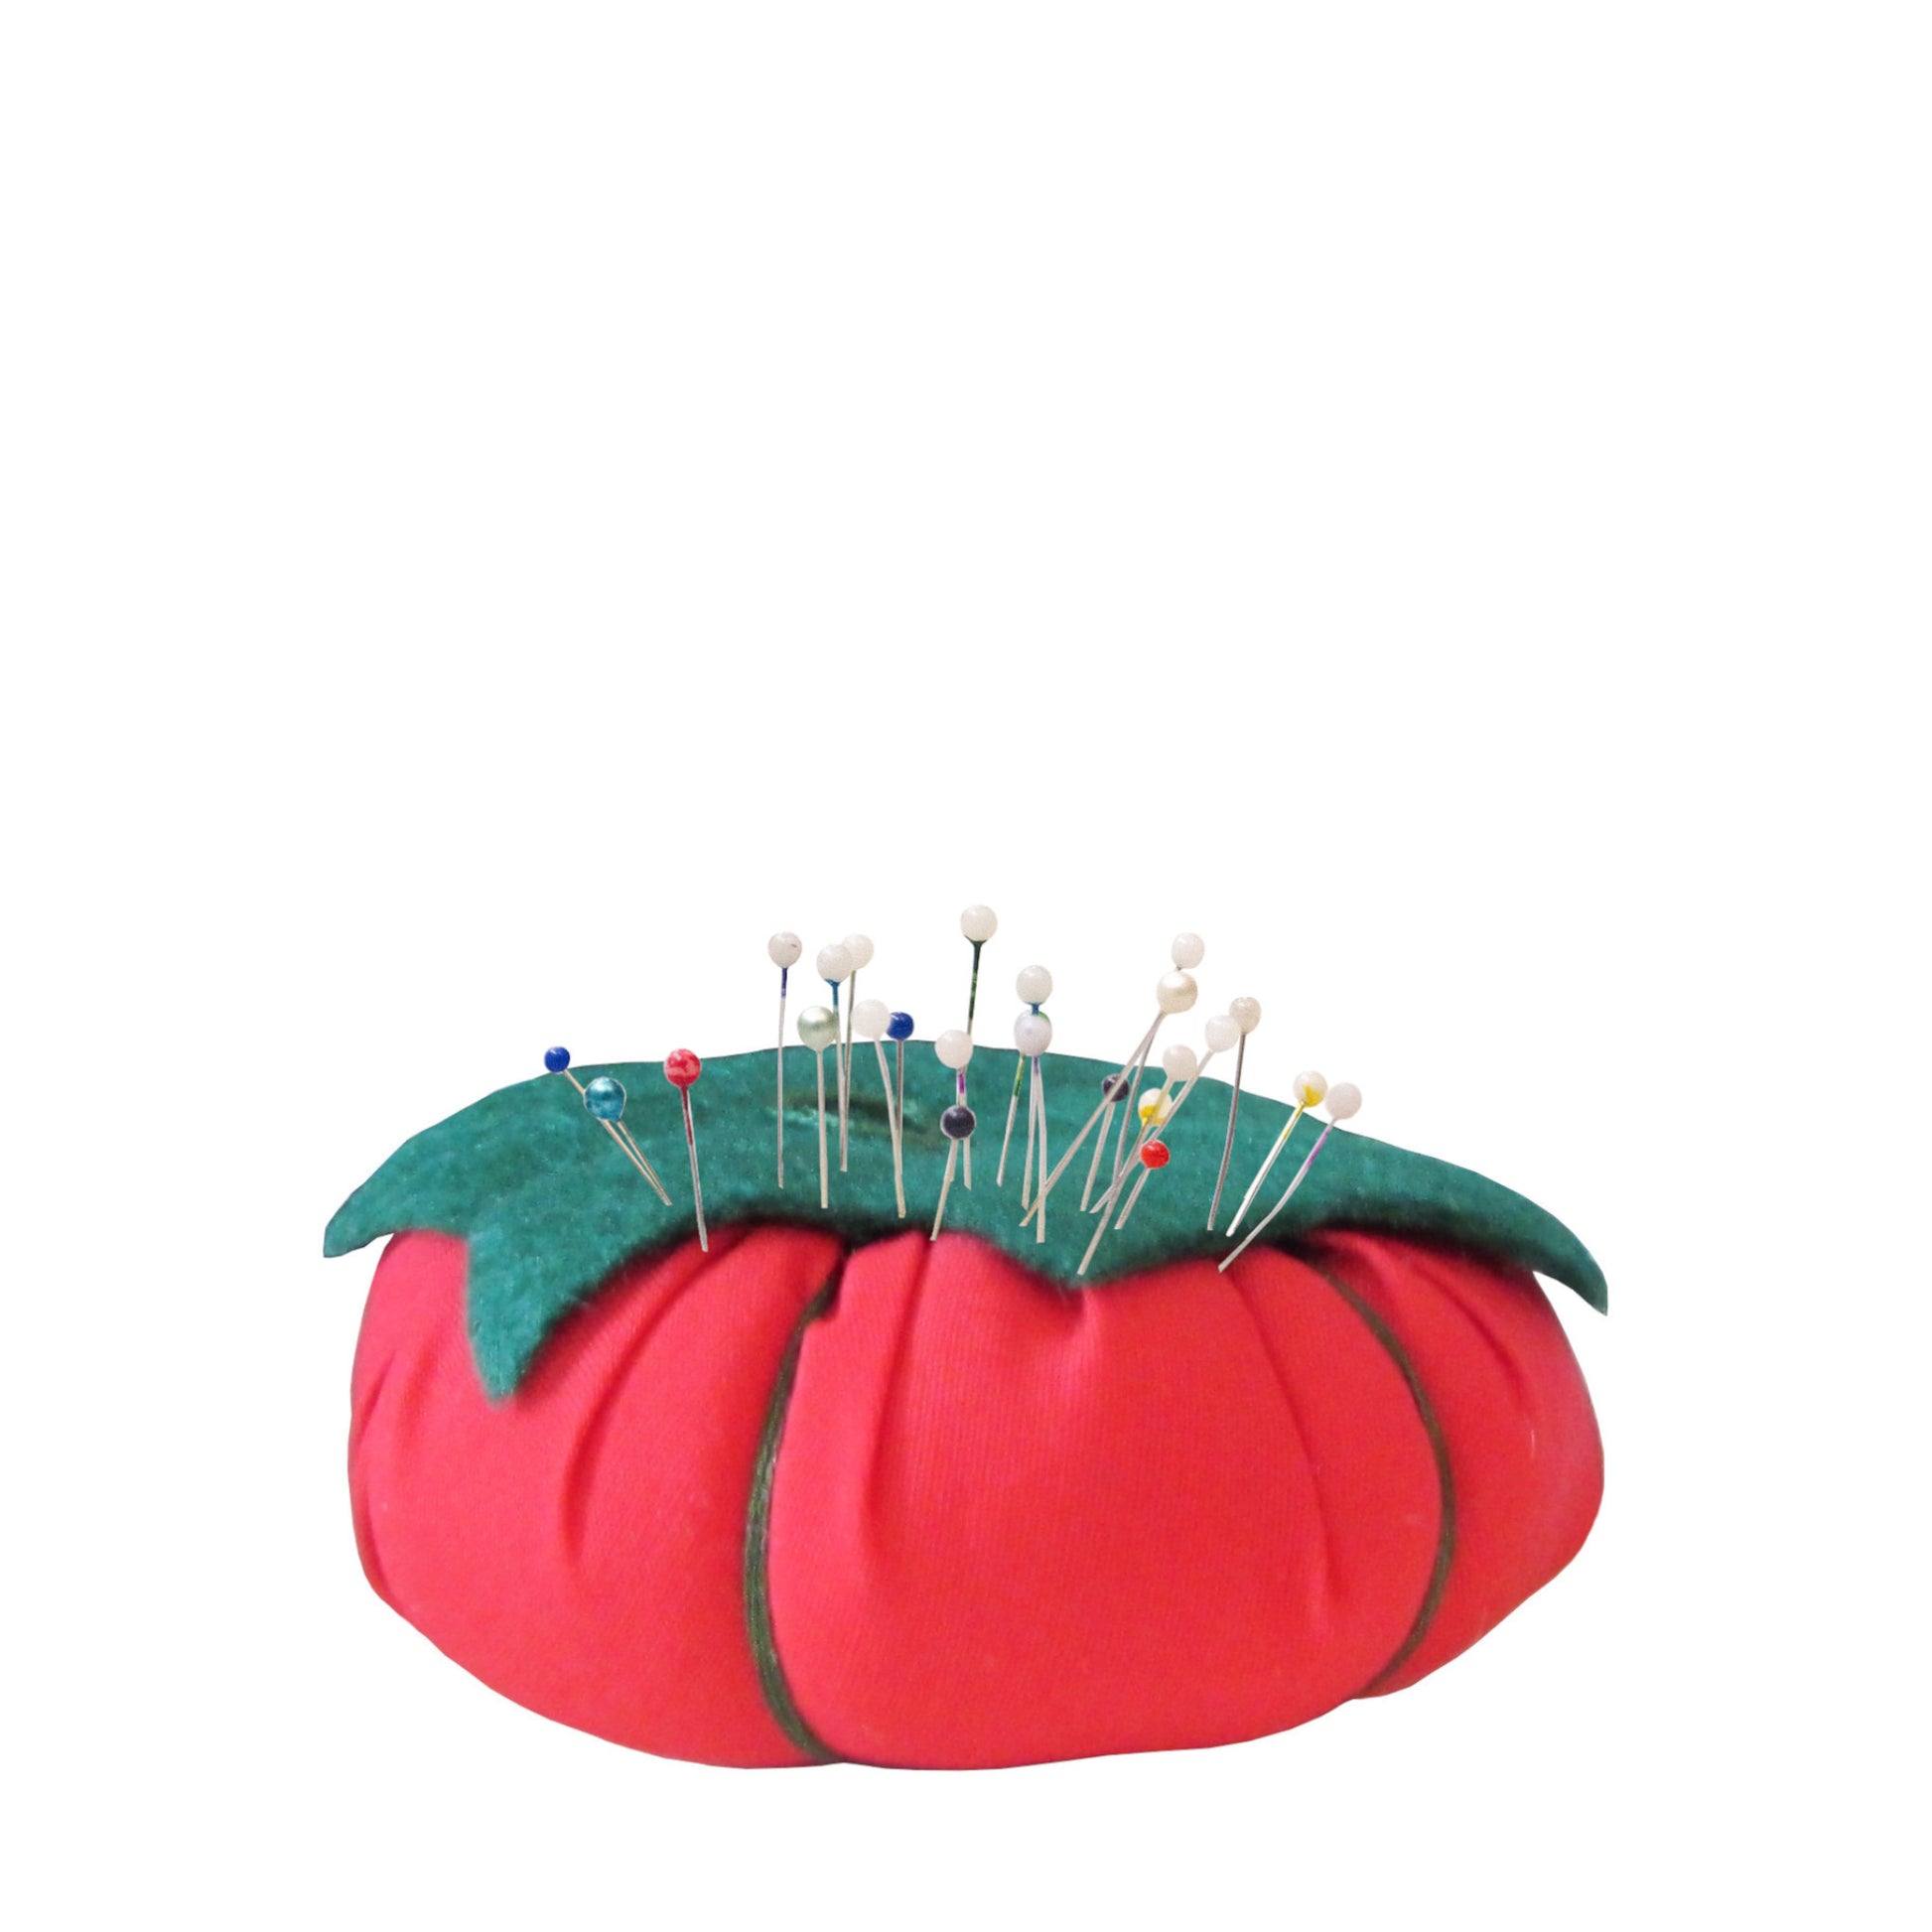 Green Top Red Tomato Pincushion with pins